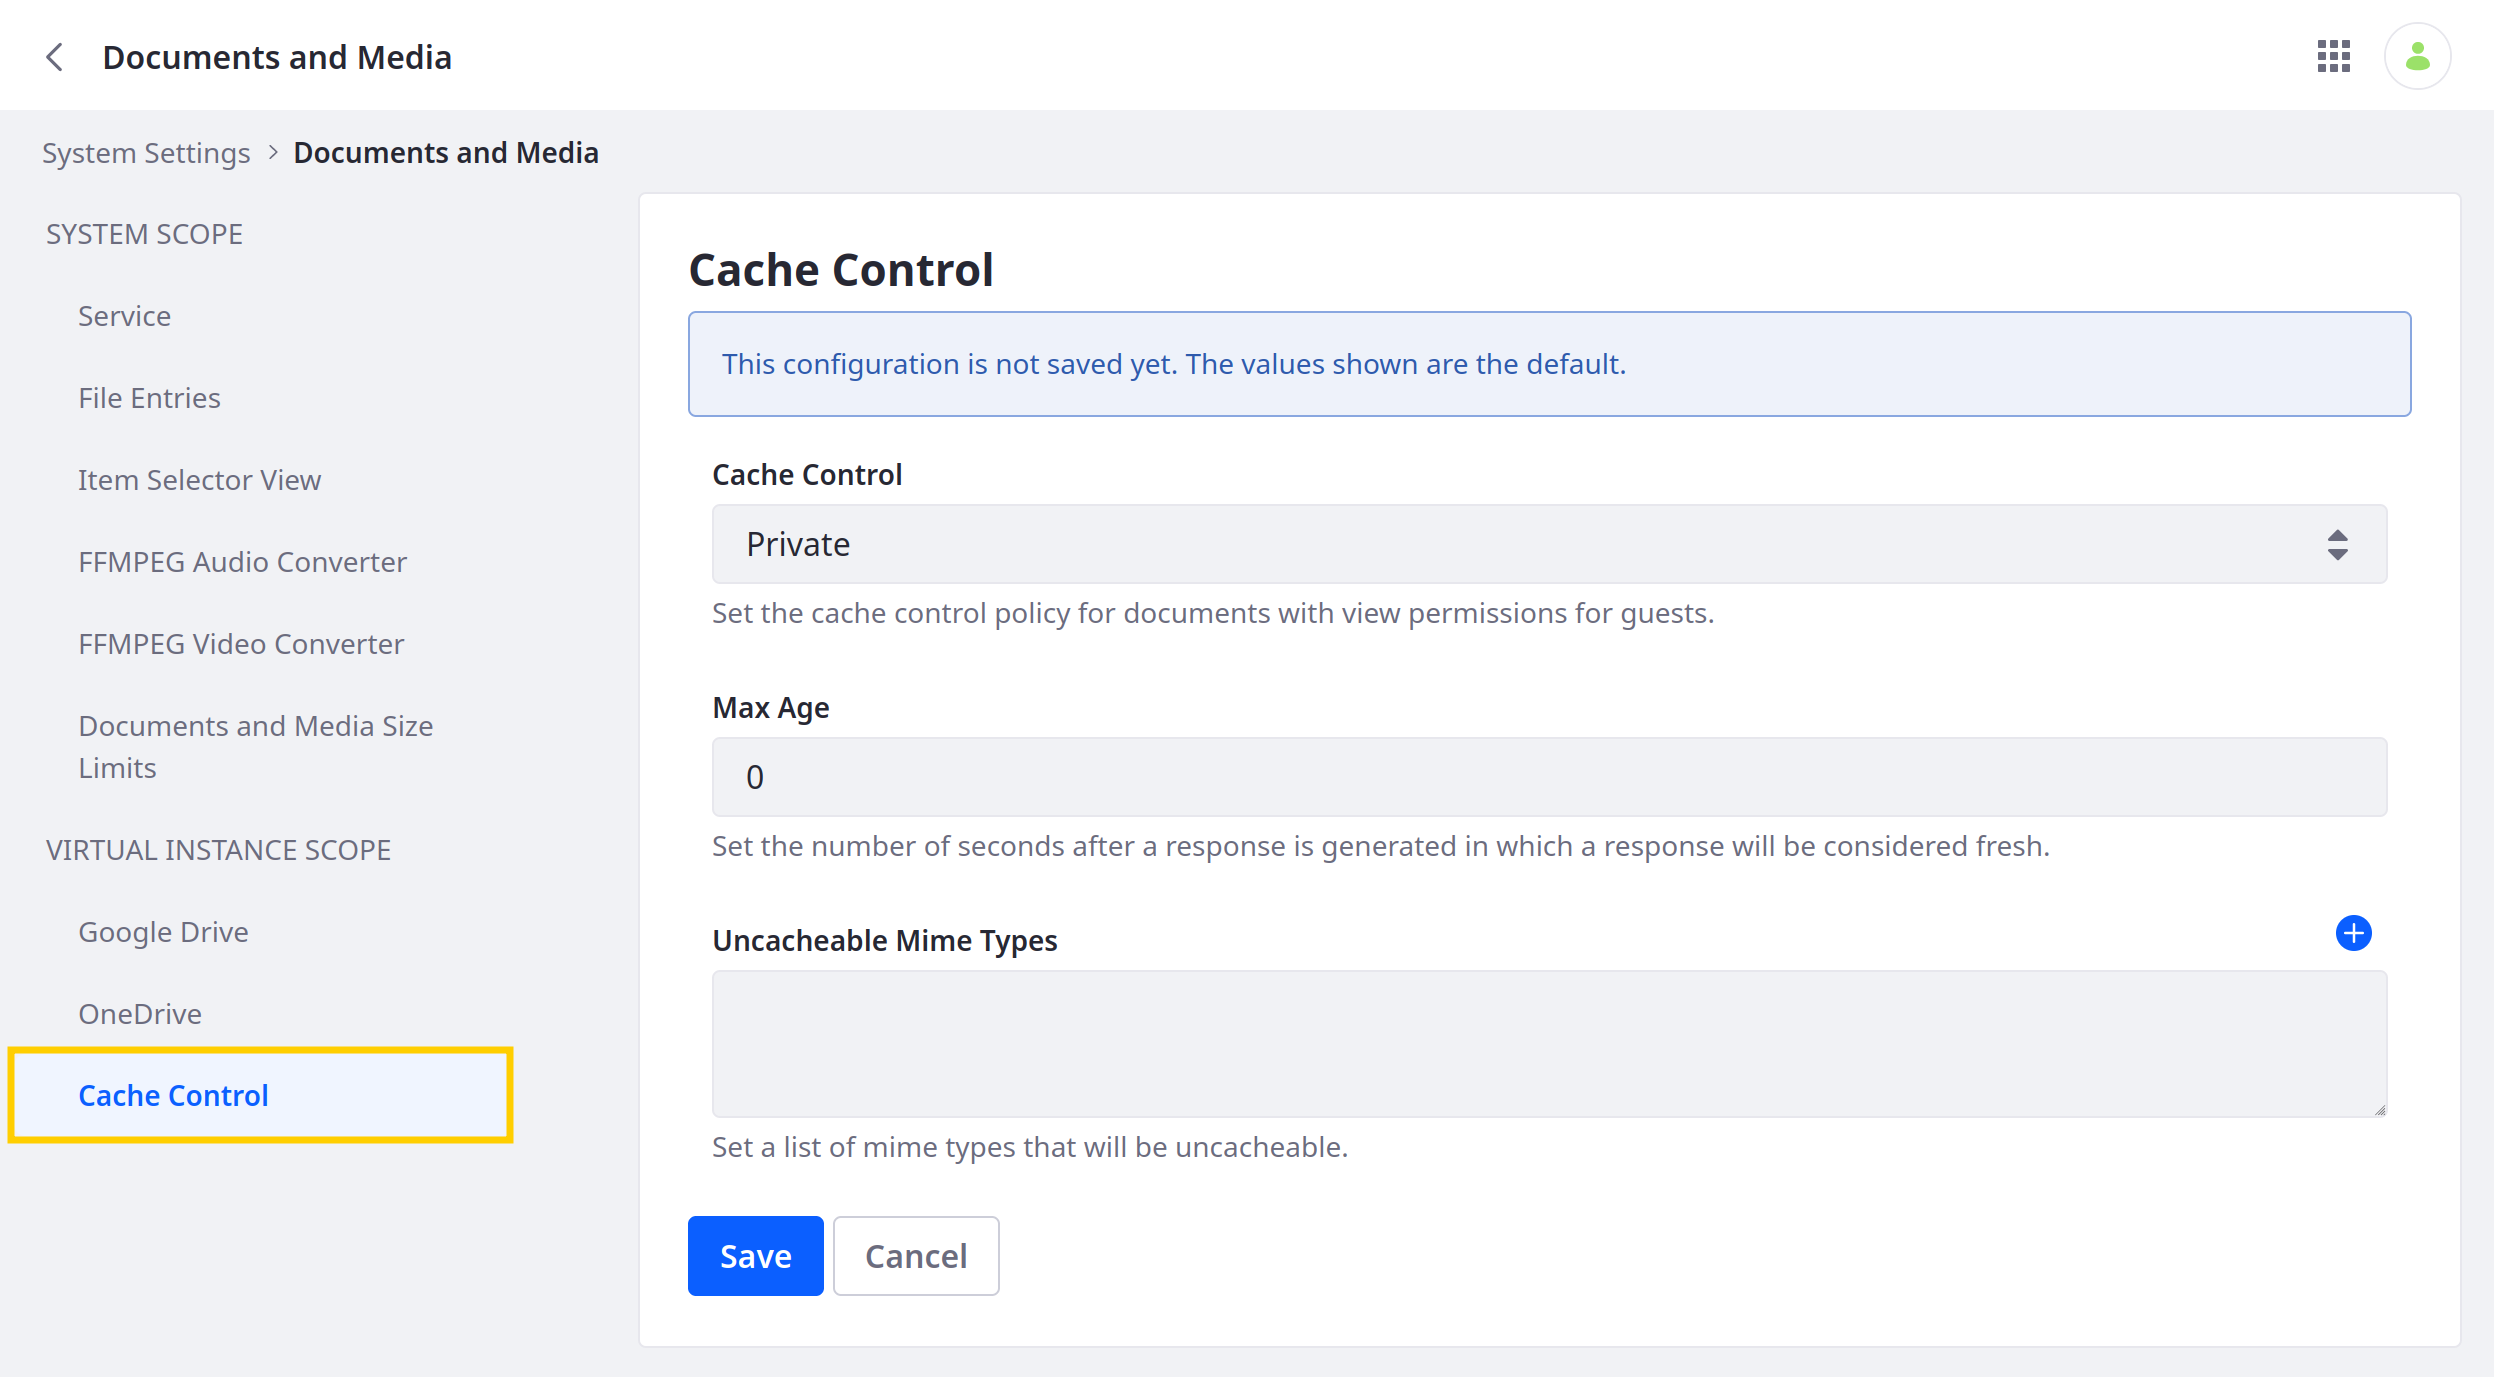 Go to Cache Control under Documents and Media settings.